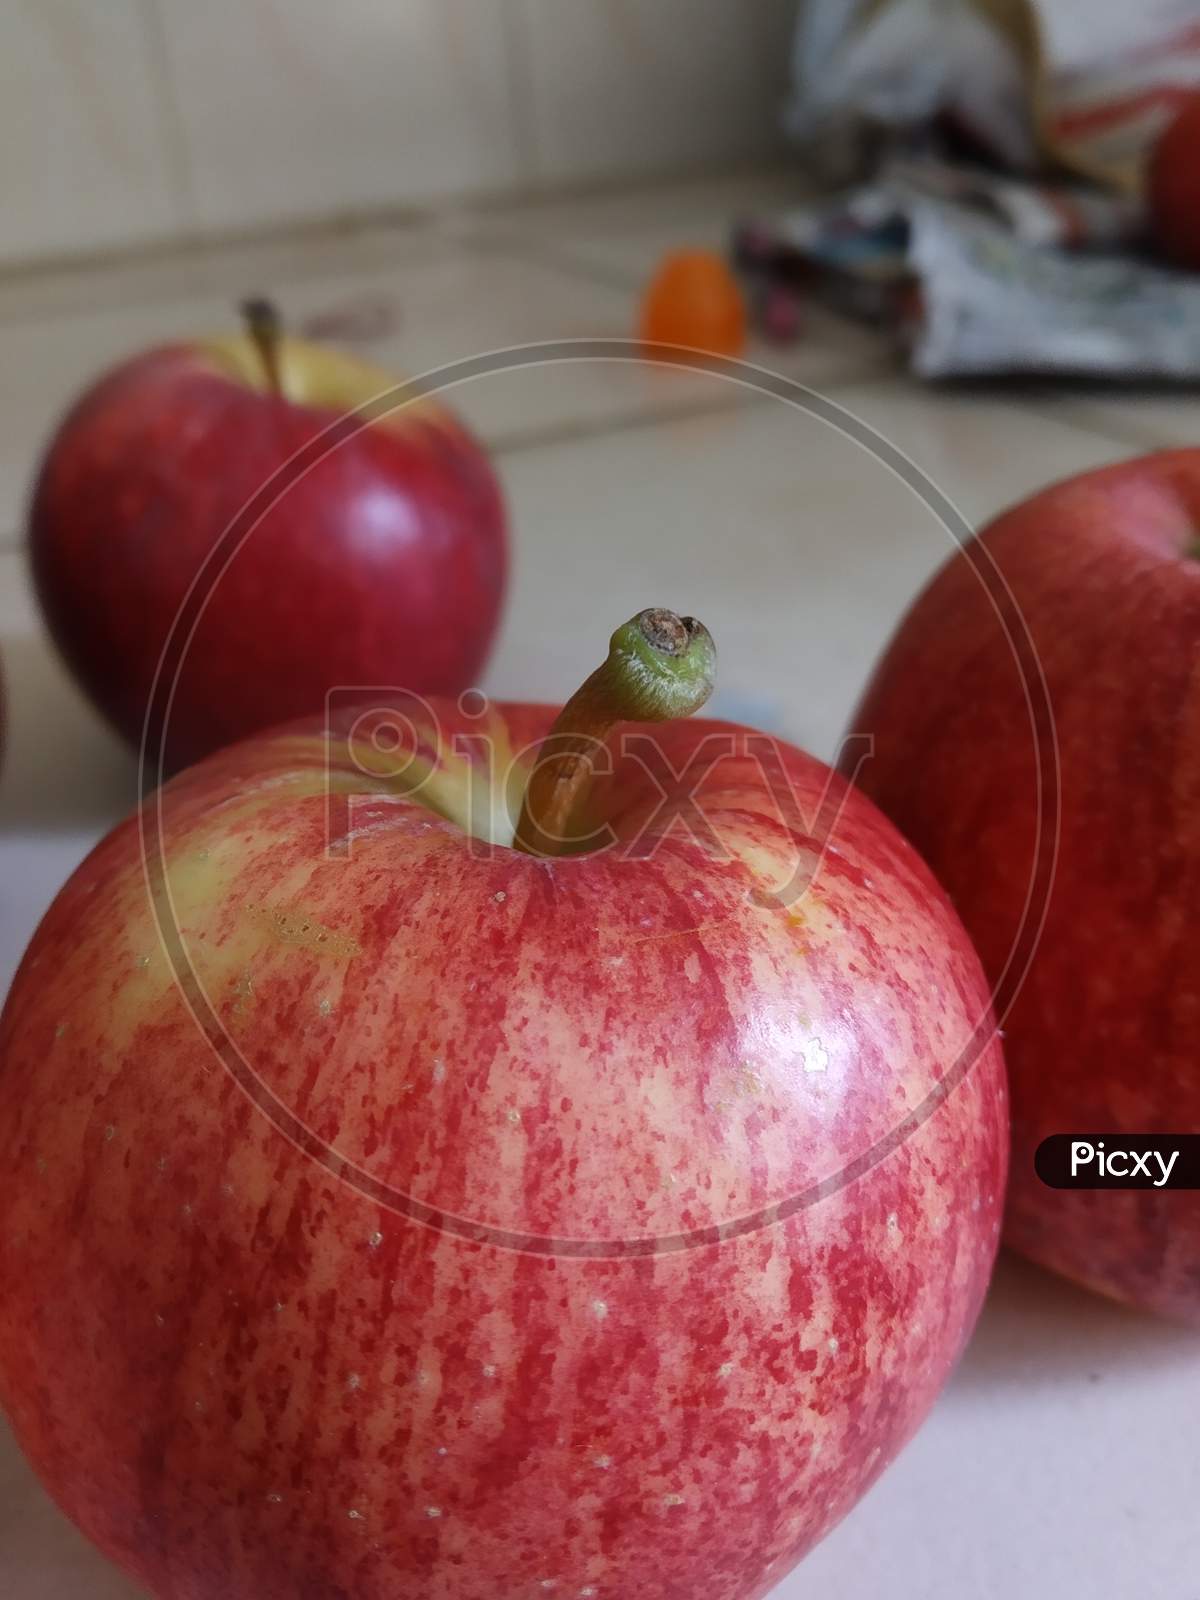 Half view of an apple